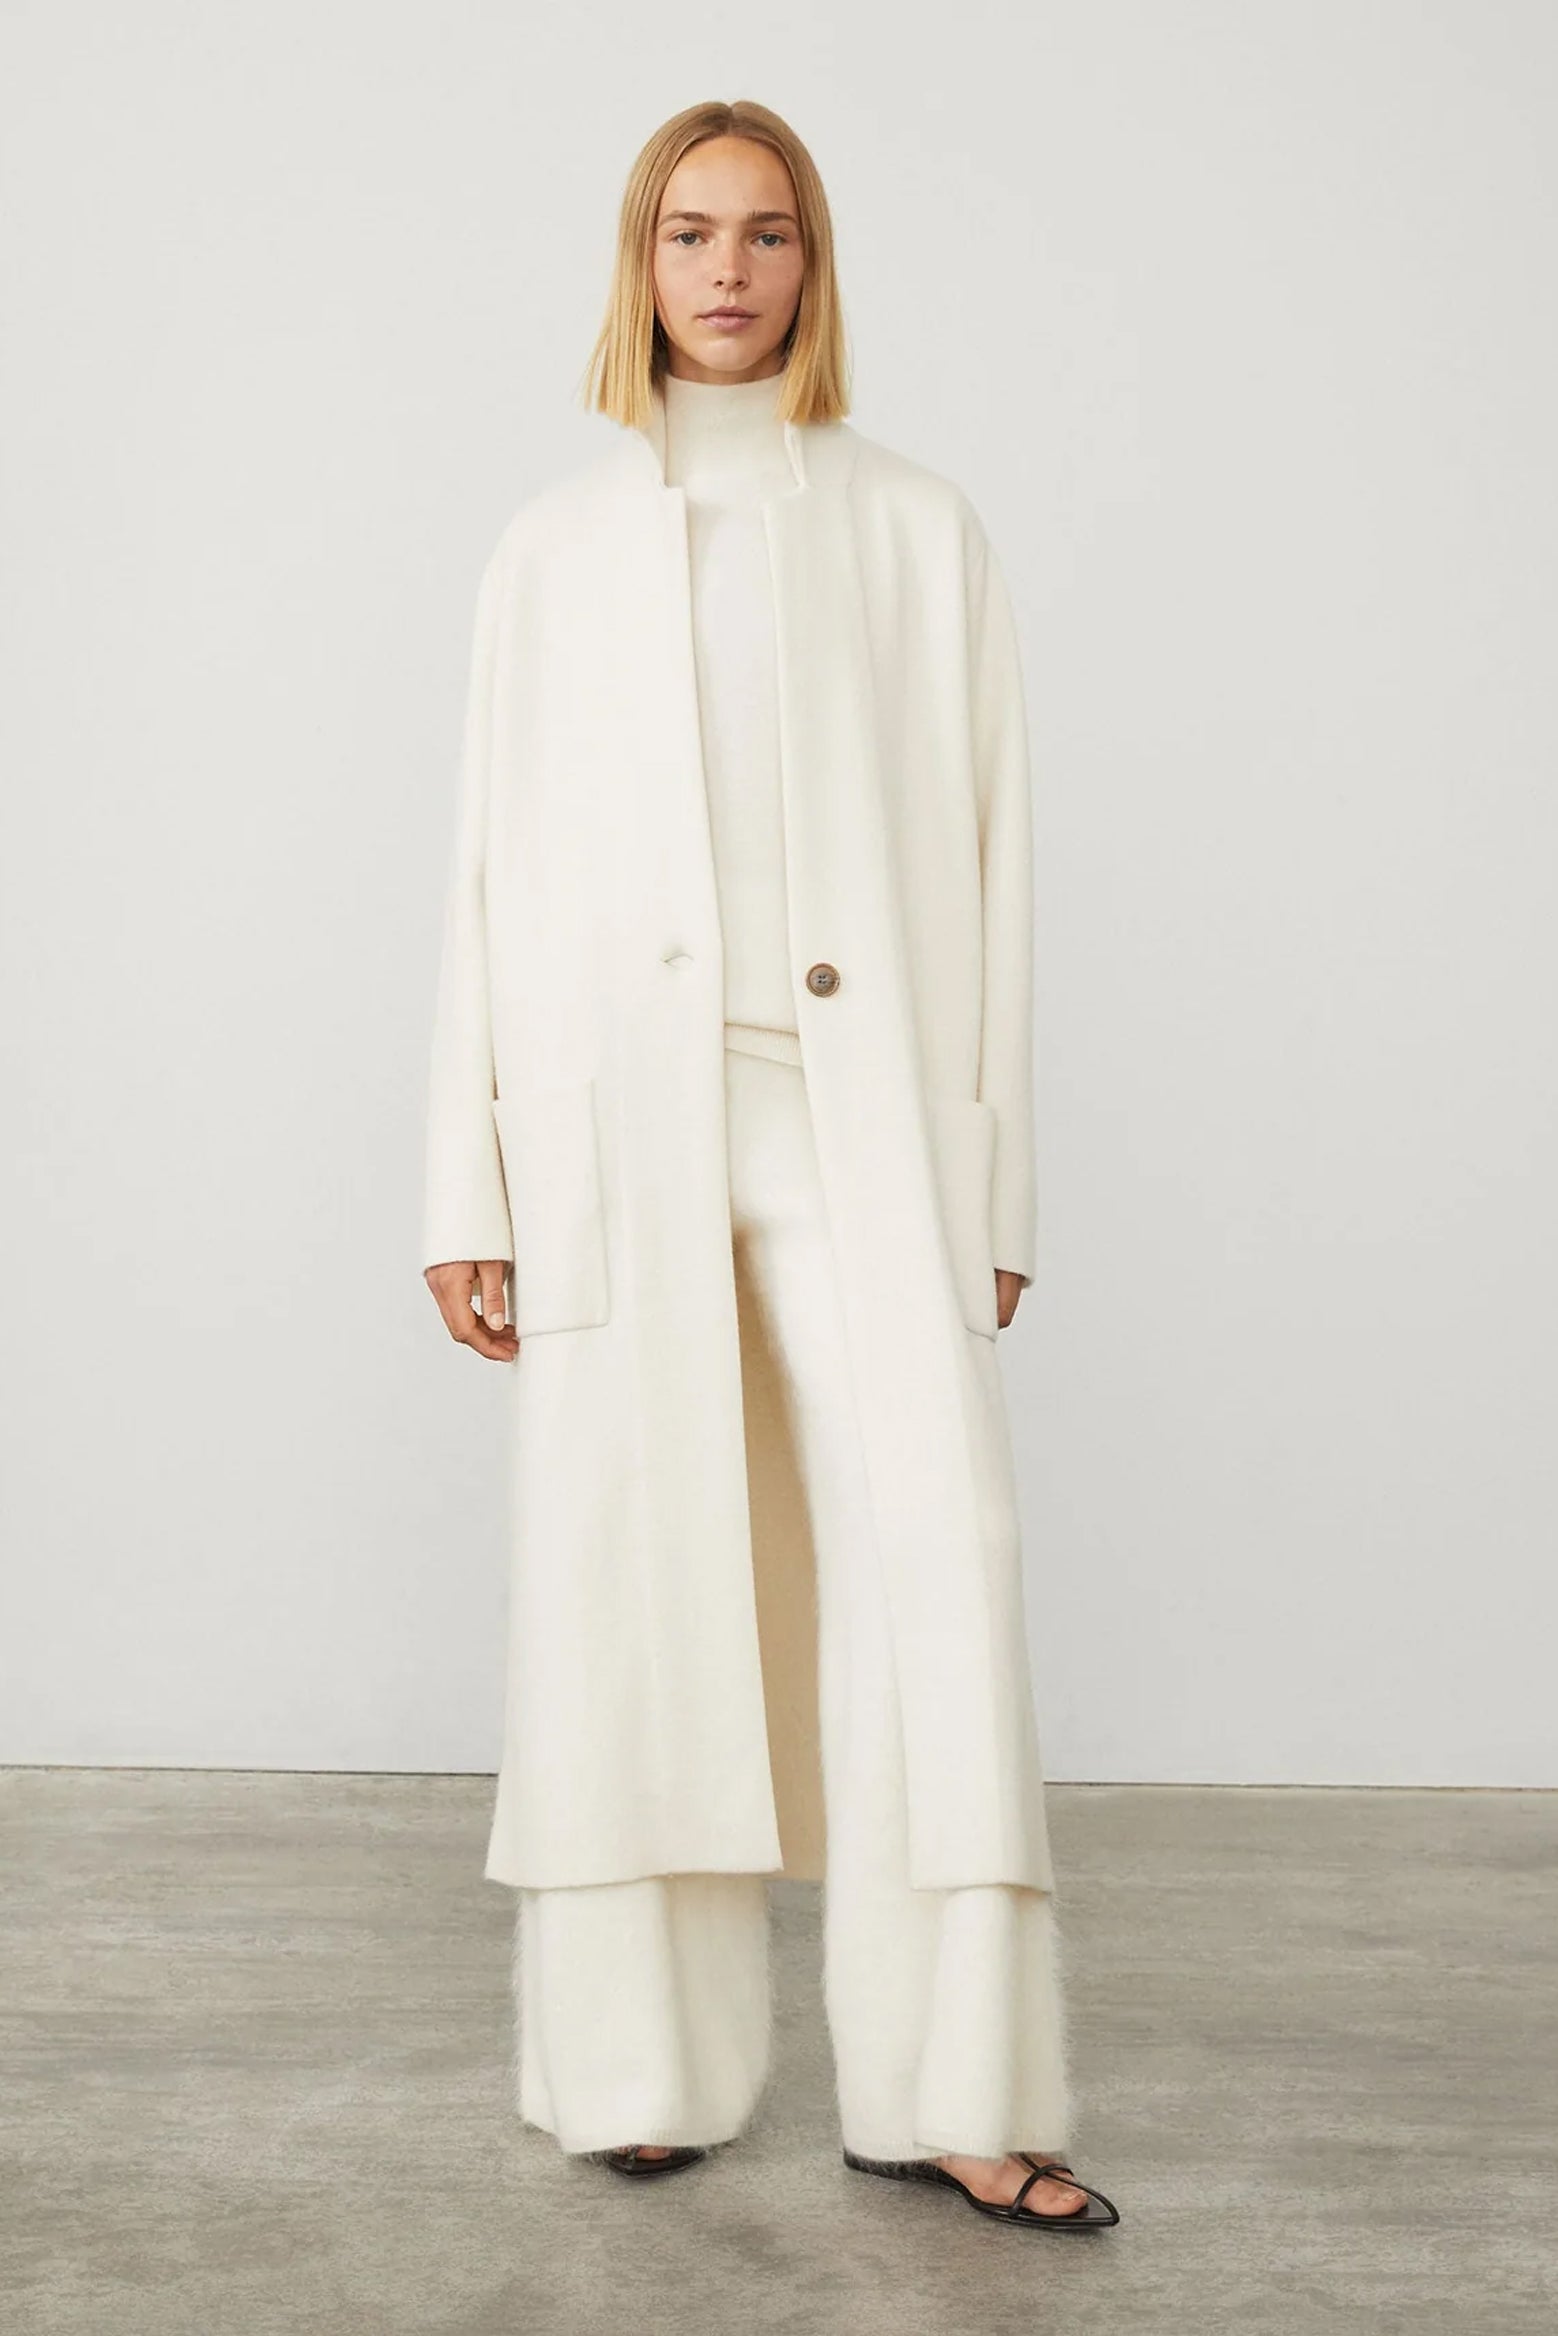 Lisa Yang Amie Cardigan Coat in Cream available at TNT The New Trend Australia